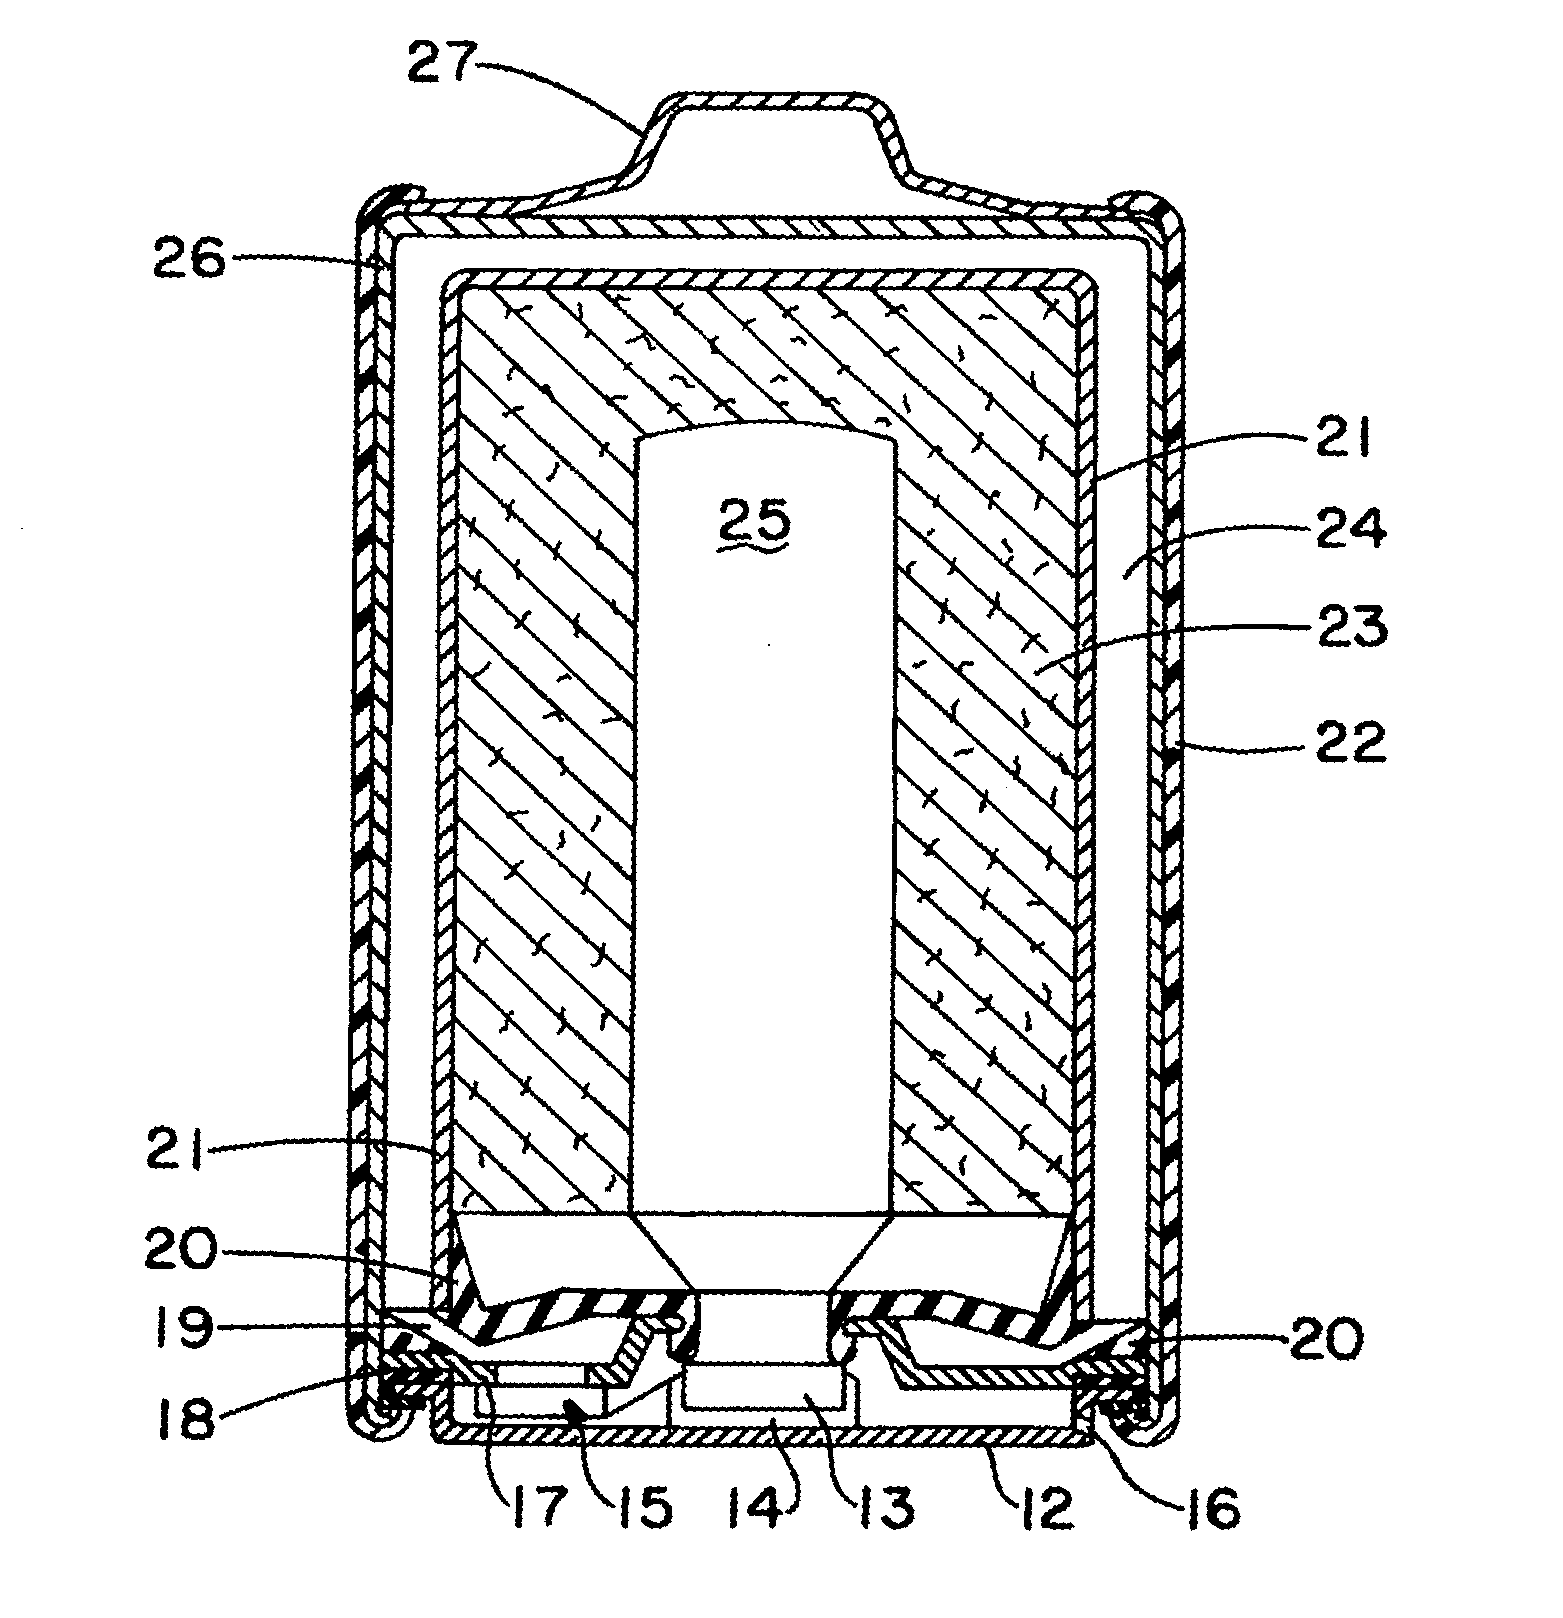 Fluid regulating microvalve assembly for fluid consuming cells with spring-like shape-retaining aperture cover